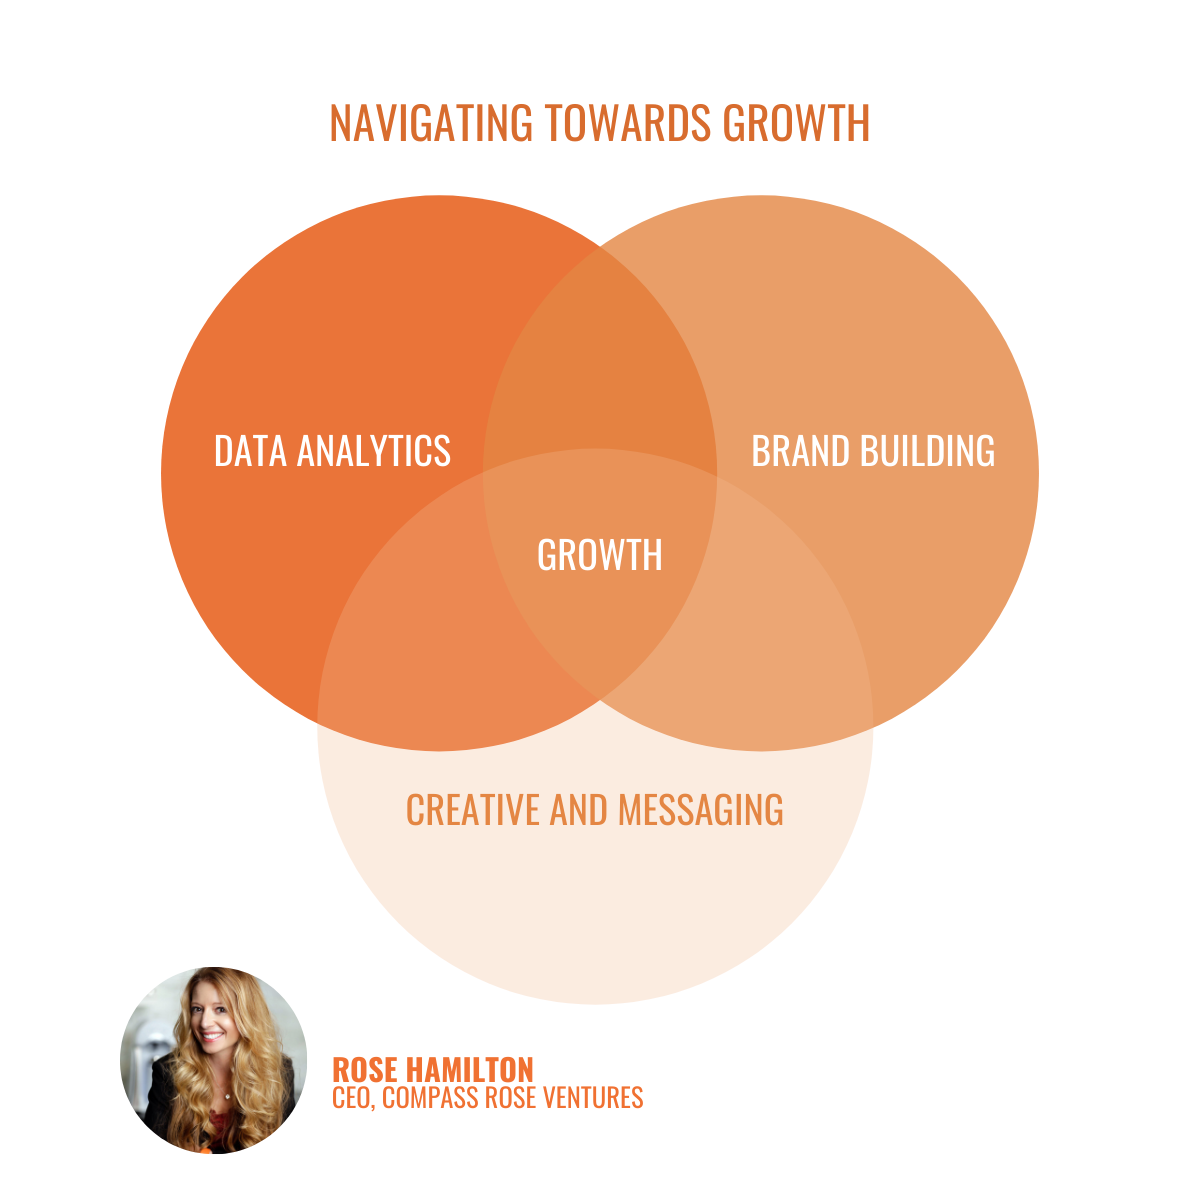 Navigating towards Brand Growth up to 100%